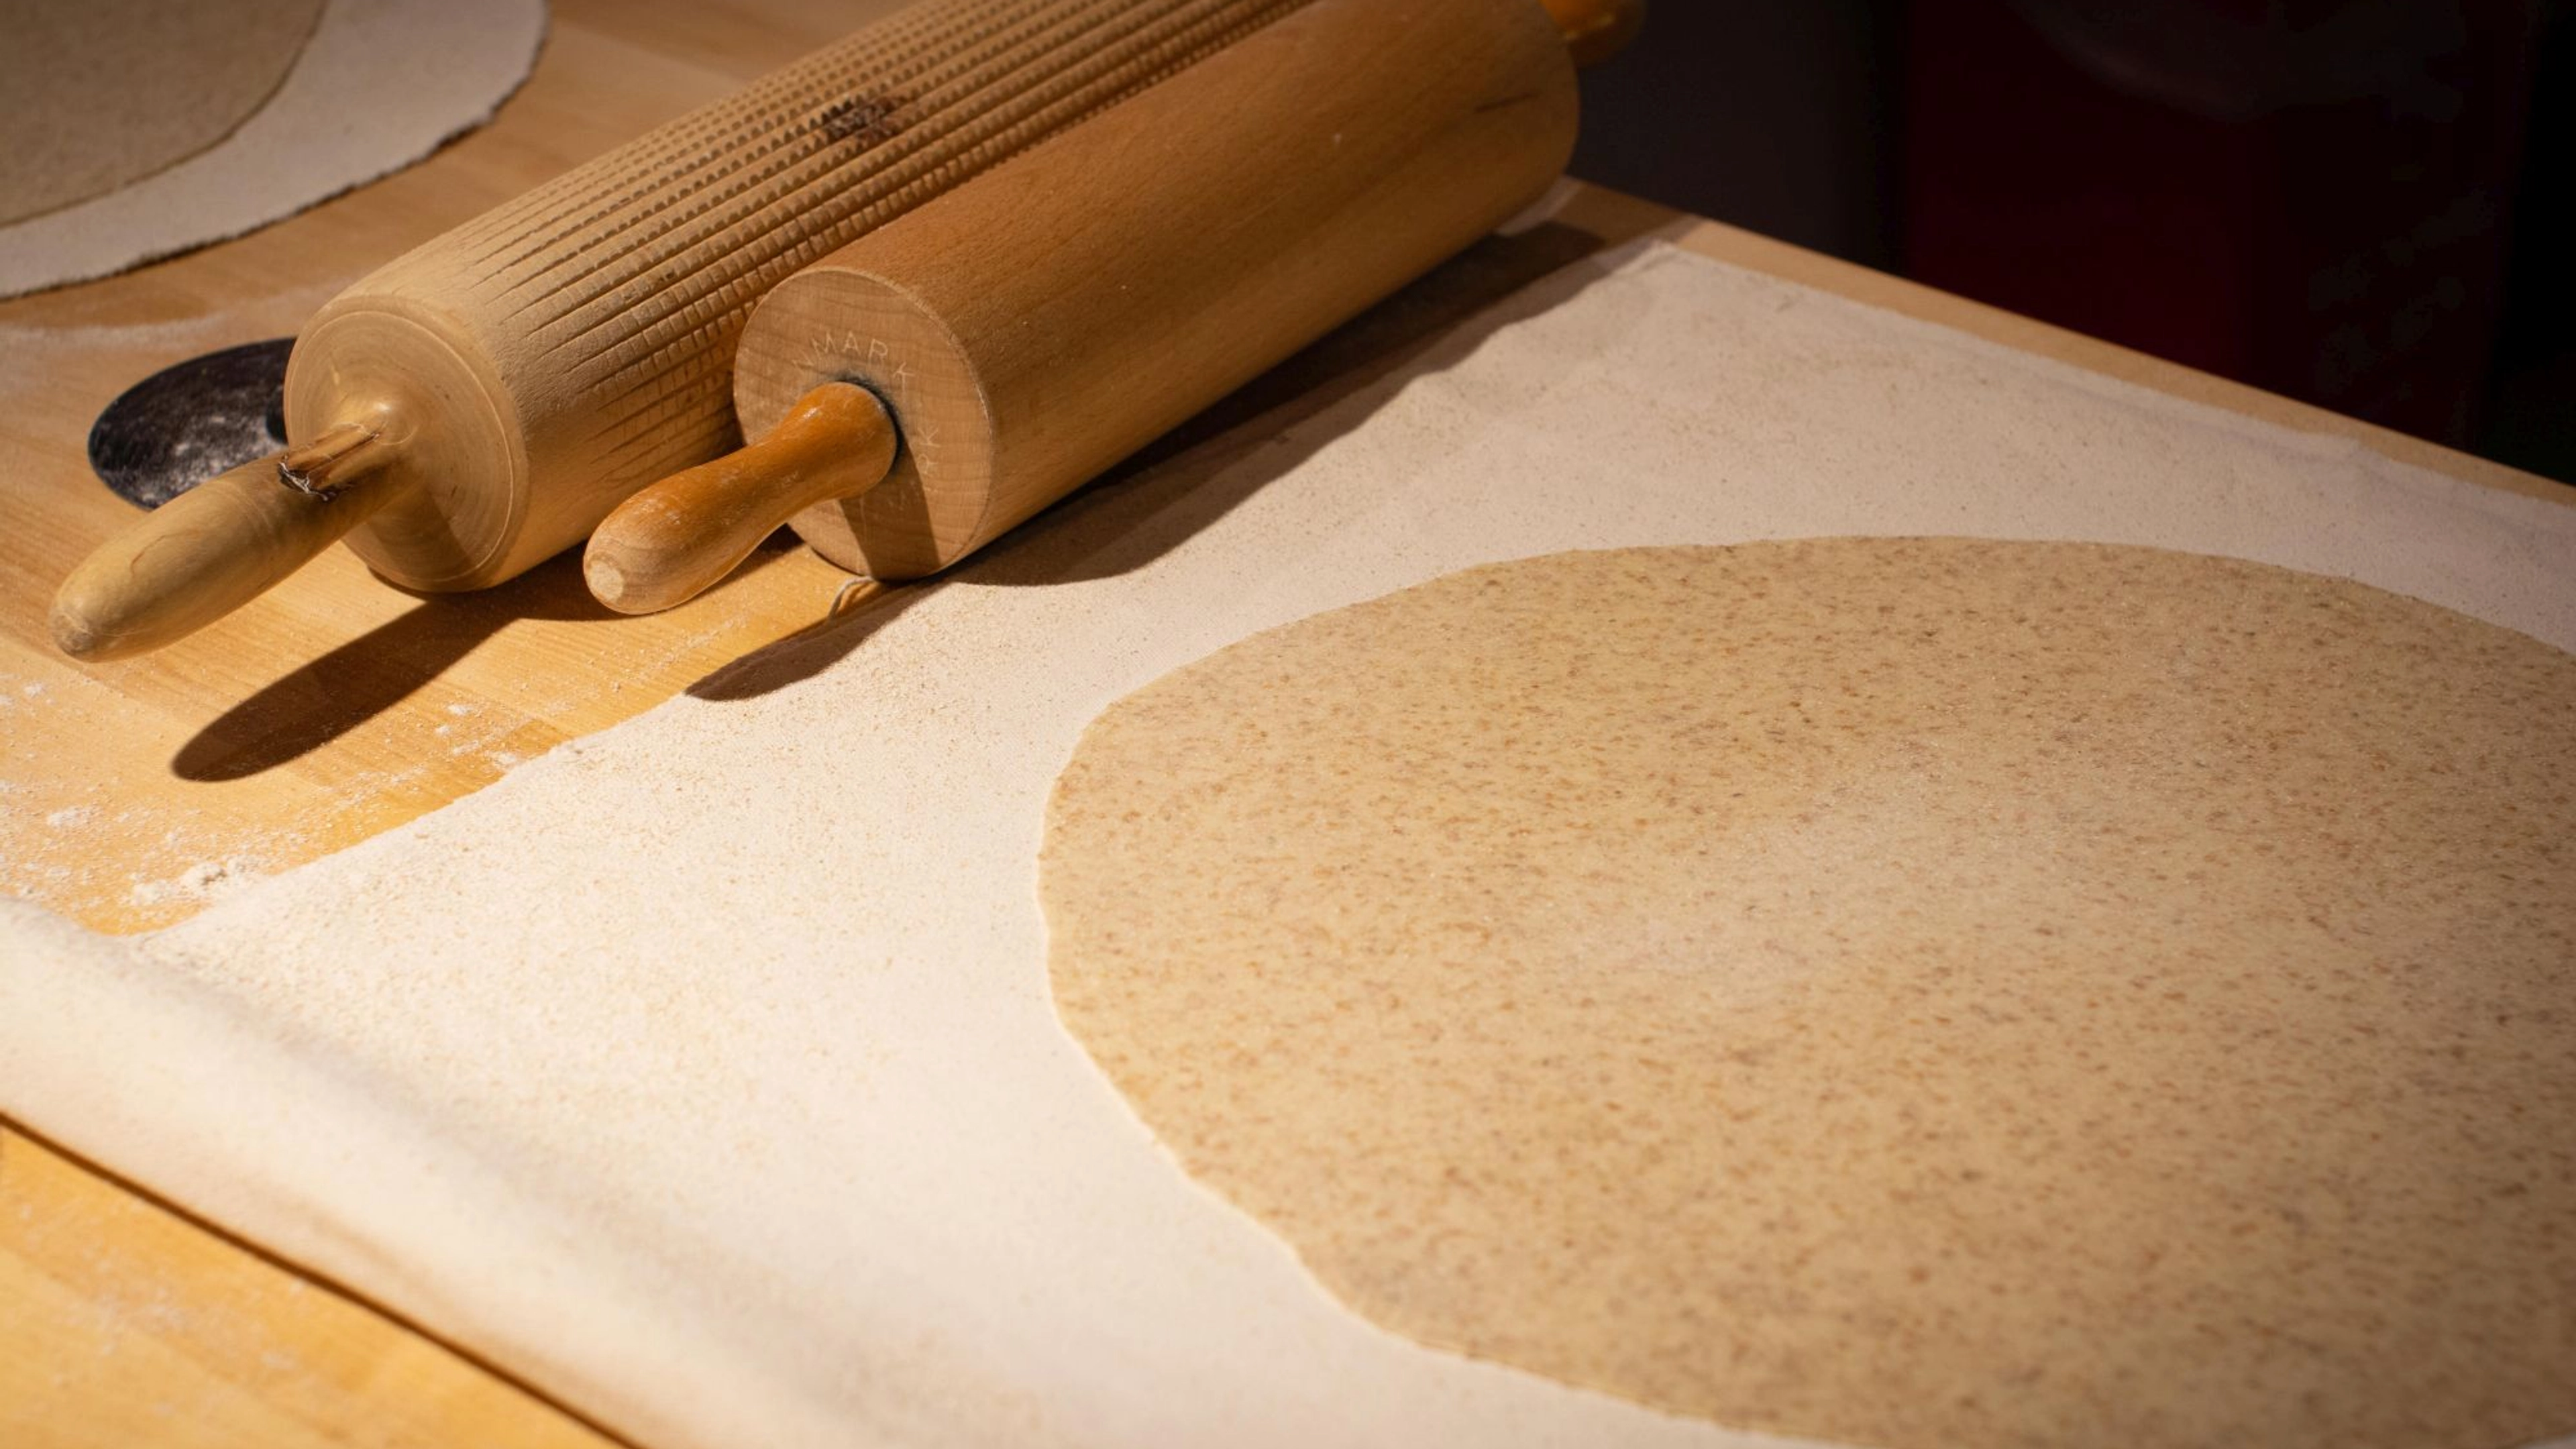 Lefse on the table - Norway